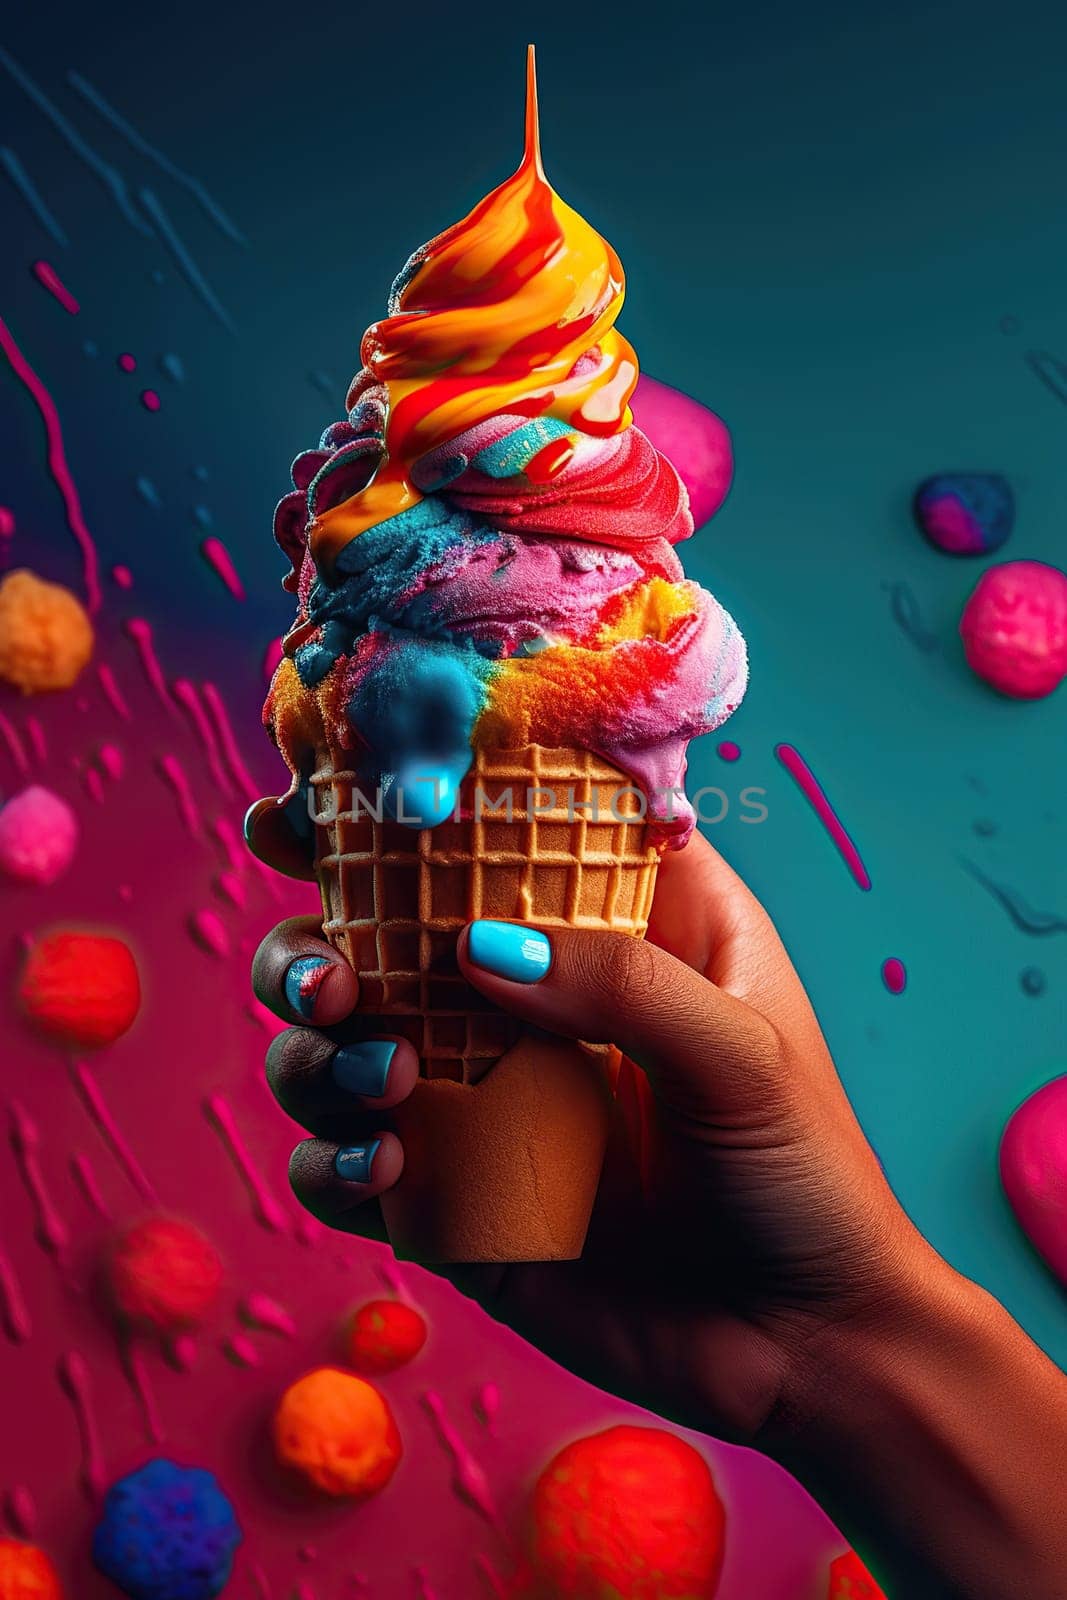 Delicious Sweet Ice Cream With Colorful Topping In Waffle Cup